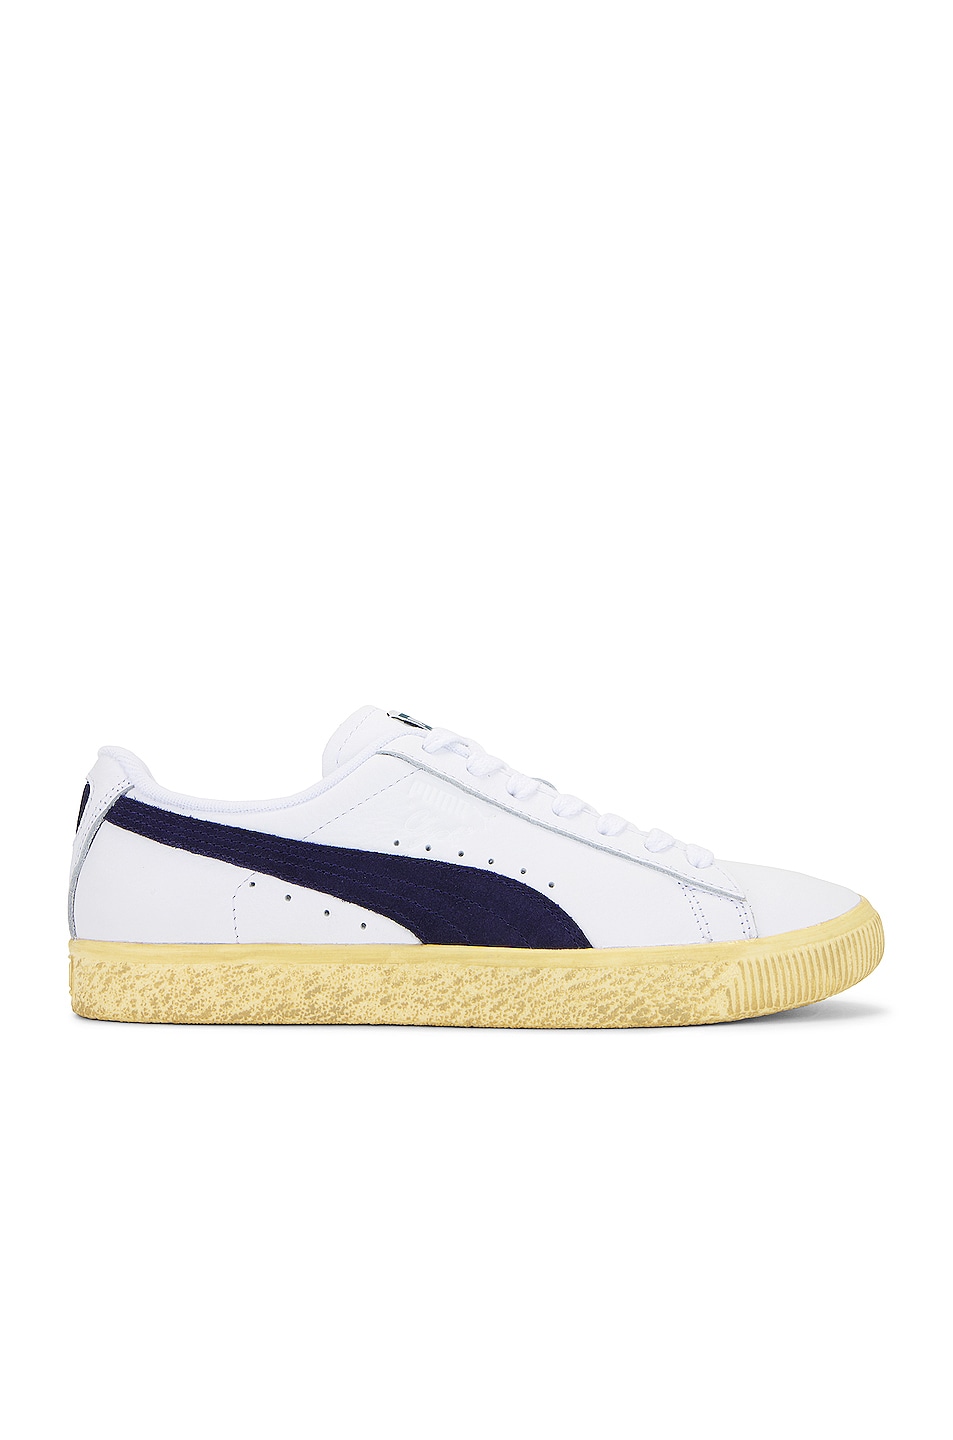 Image 1 of Puma Select Clyde Vintage Sneaker in WHITE / CLYDE VINTAGE